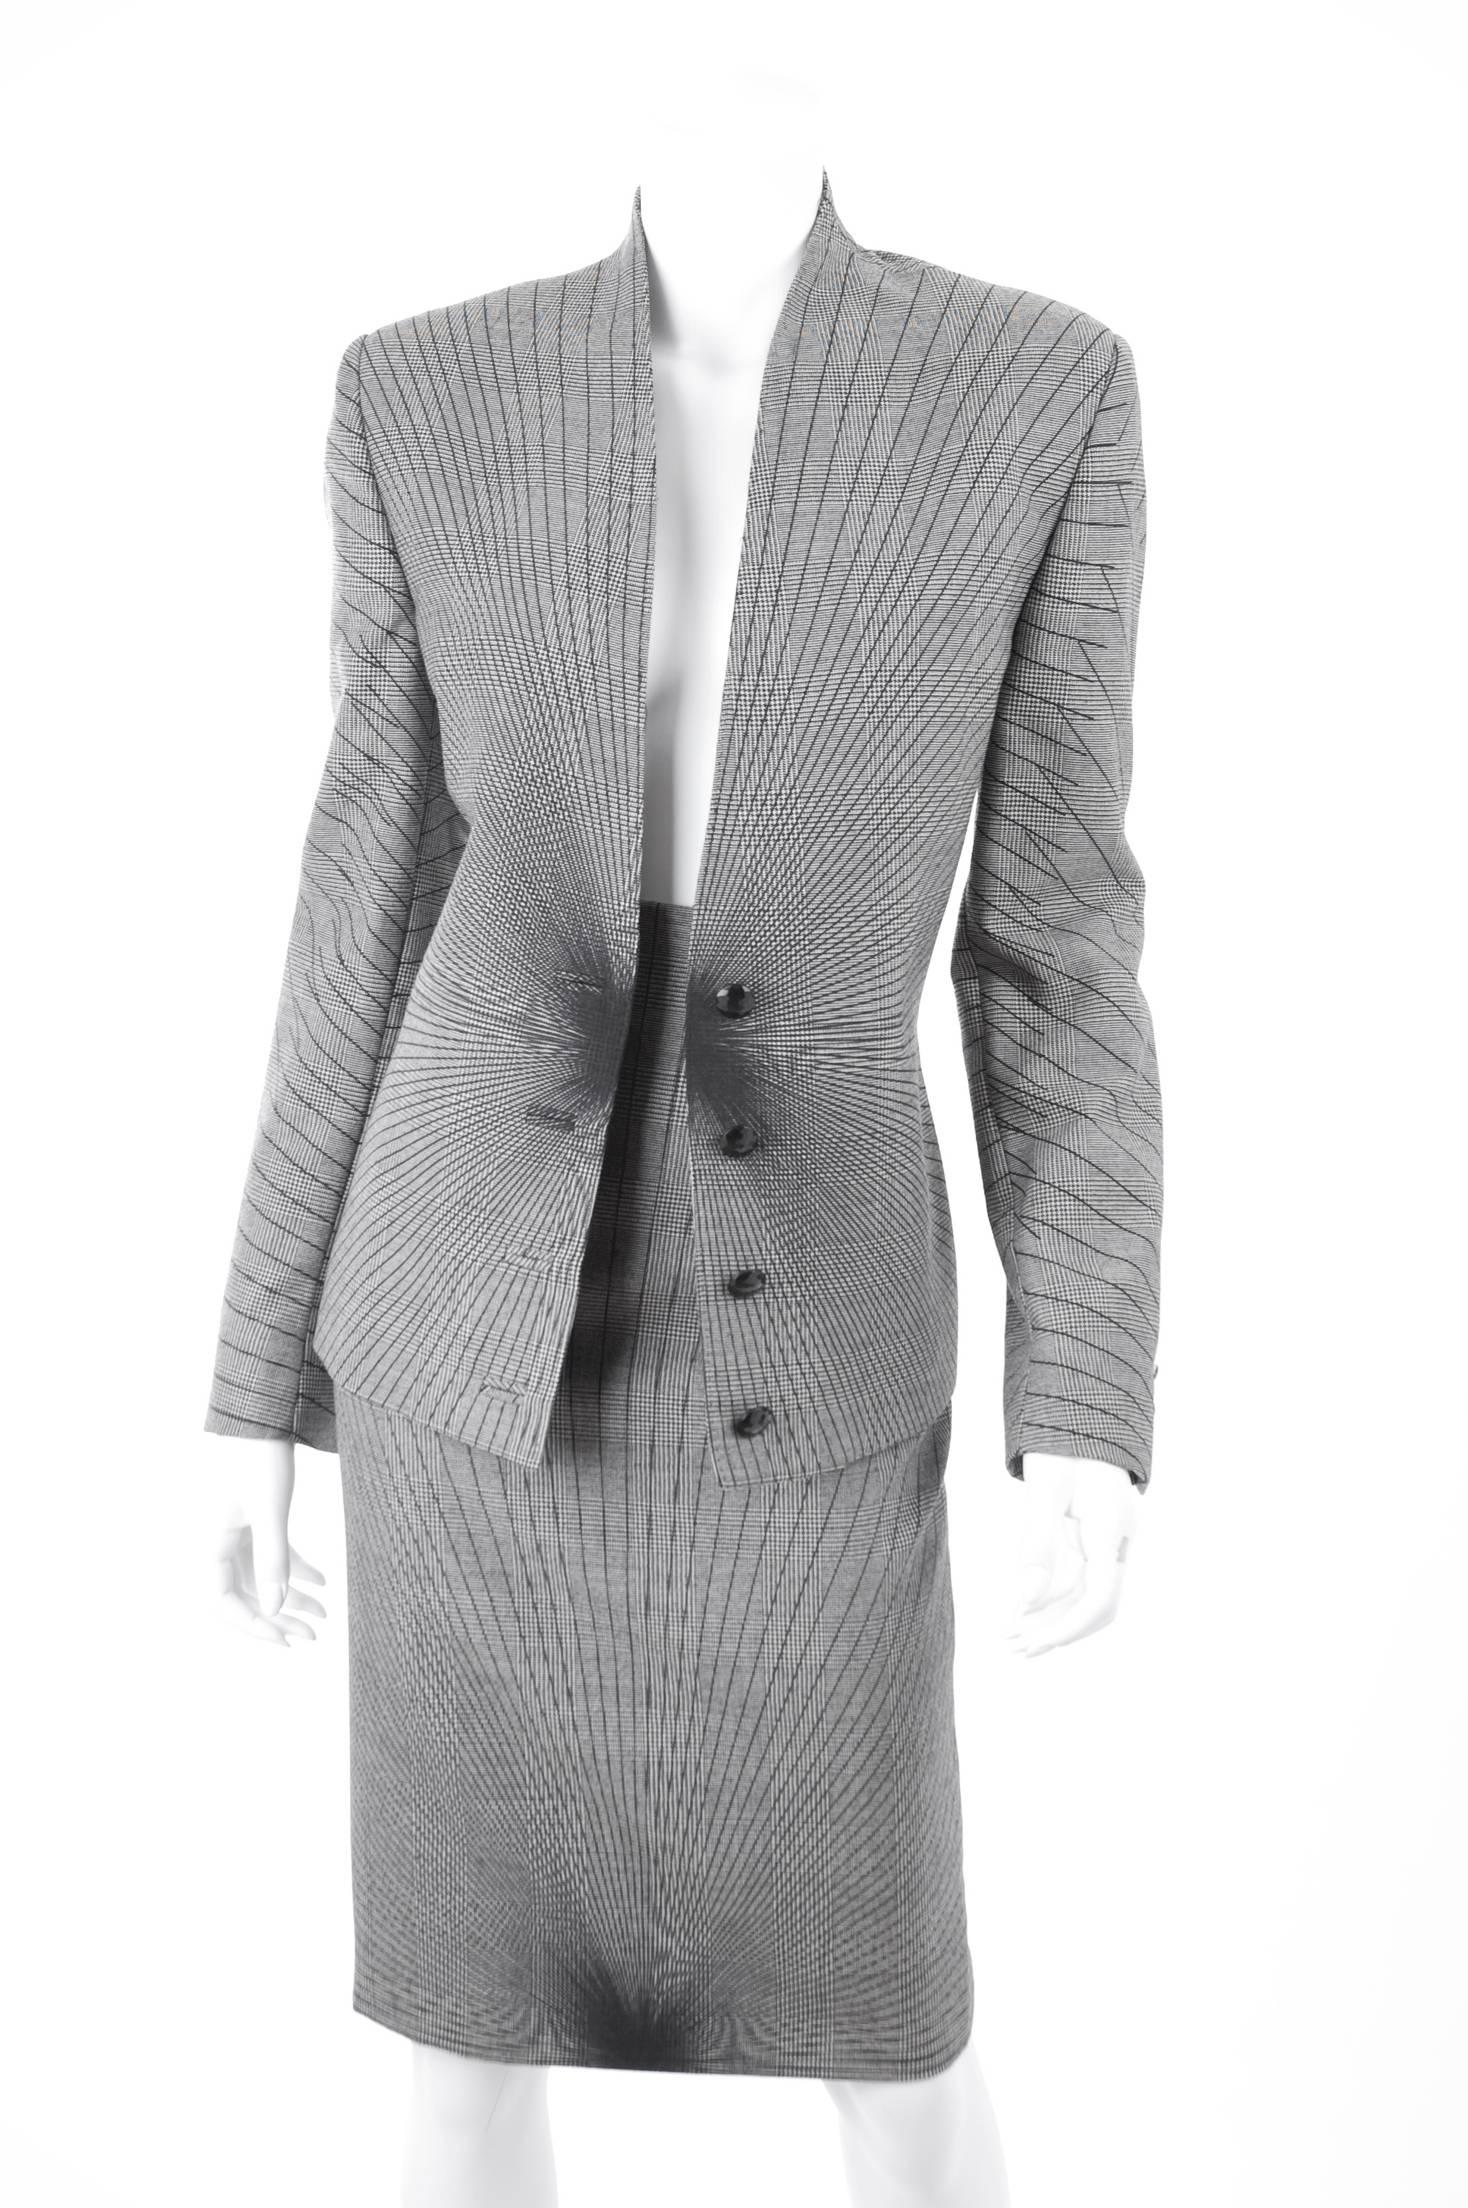 90's Gianni Versace Couture Suit in black and white with optical illusion pattern.
Size Italy 46 - US 8 
Perfect condition.
Measurements:
Jacket: length 25.5